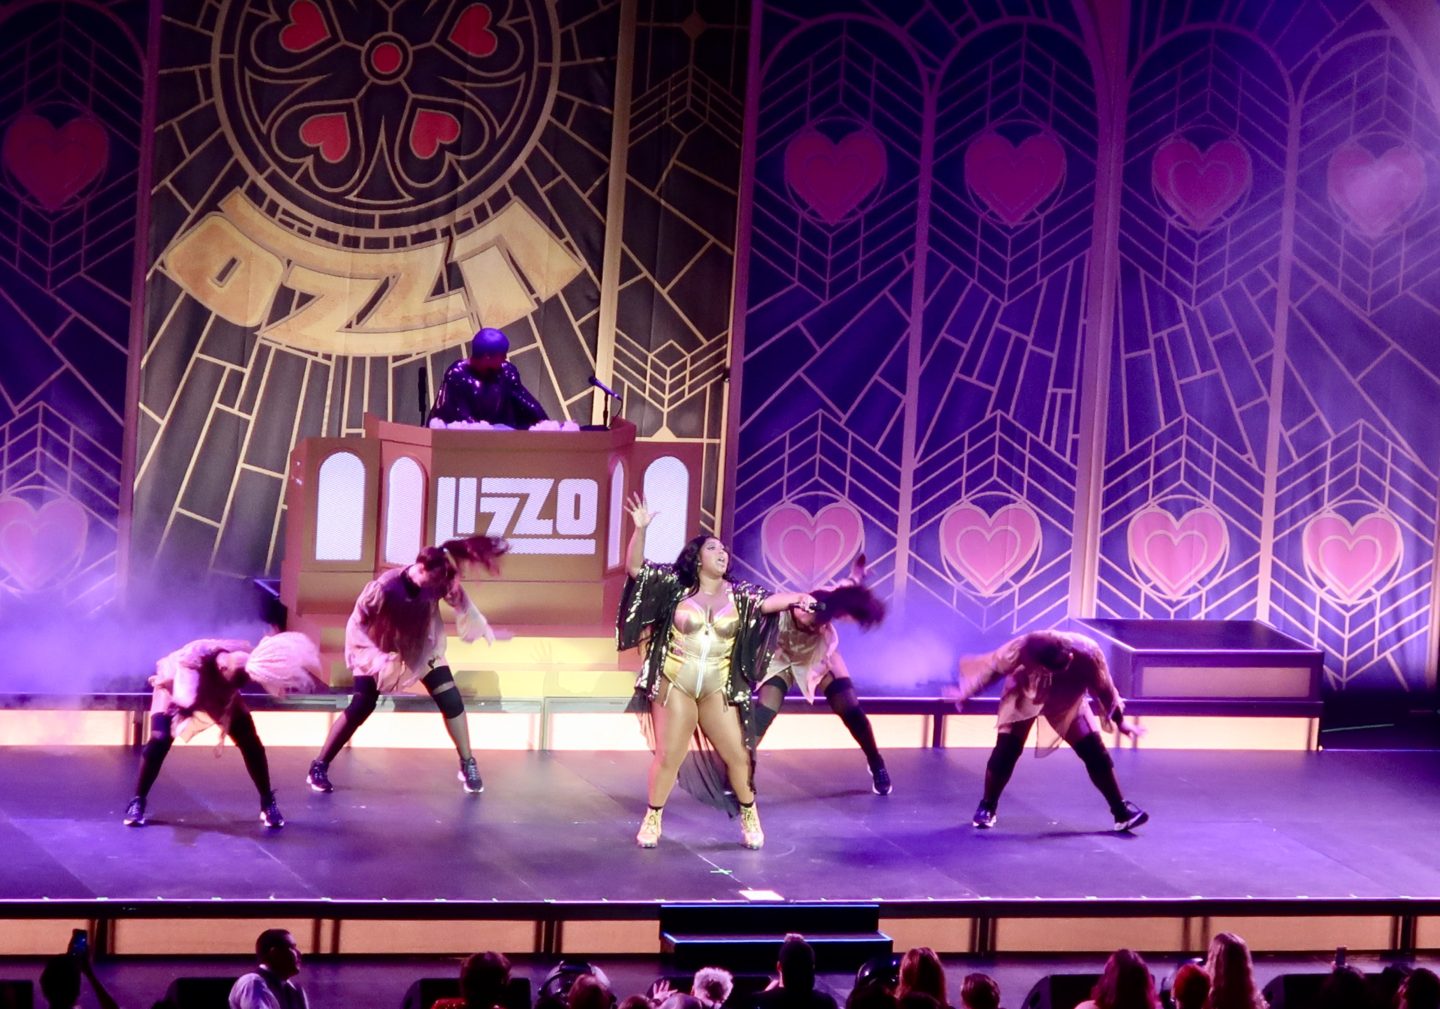 Concert Review: Lizzo’s ‘Cuz I Love You Too’ Tour